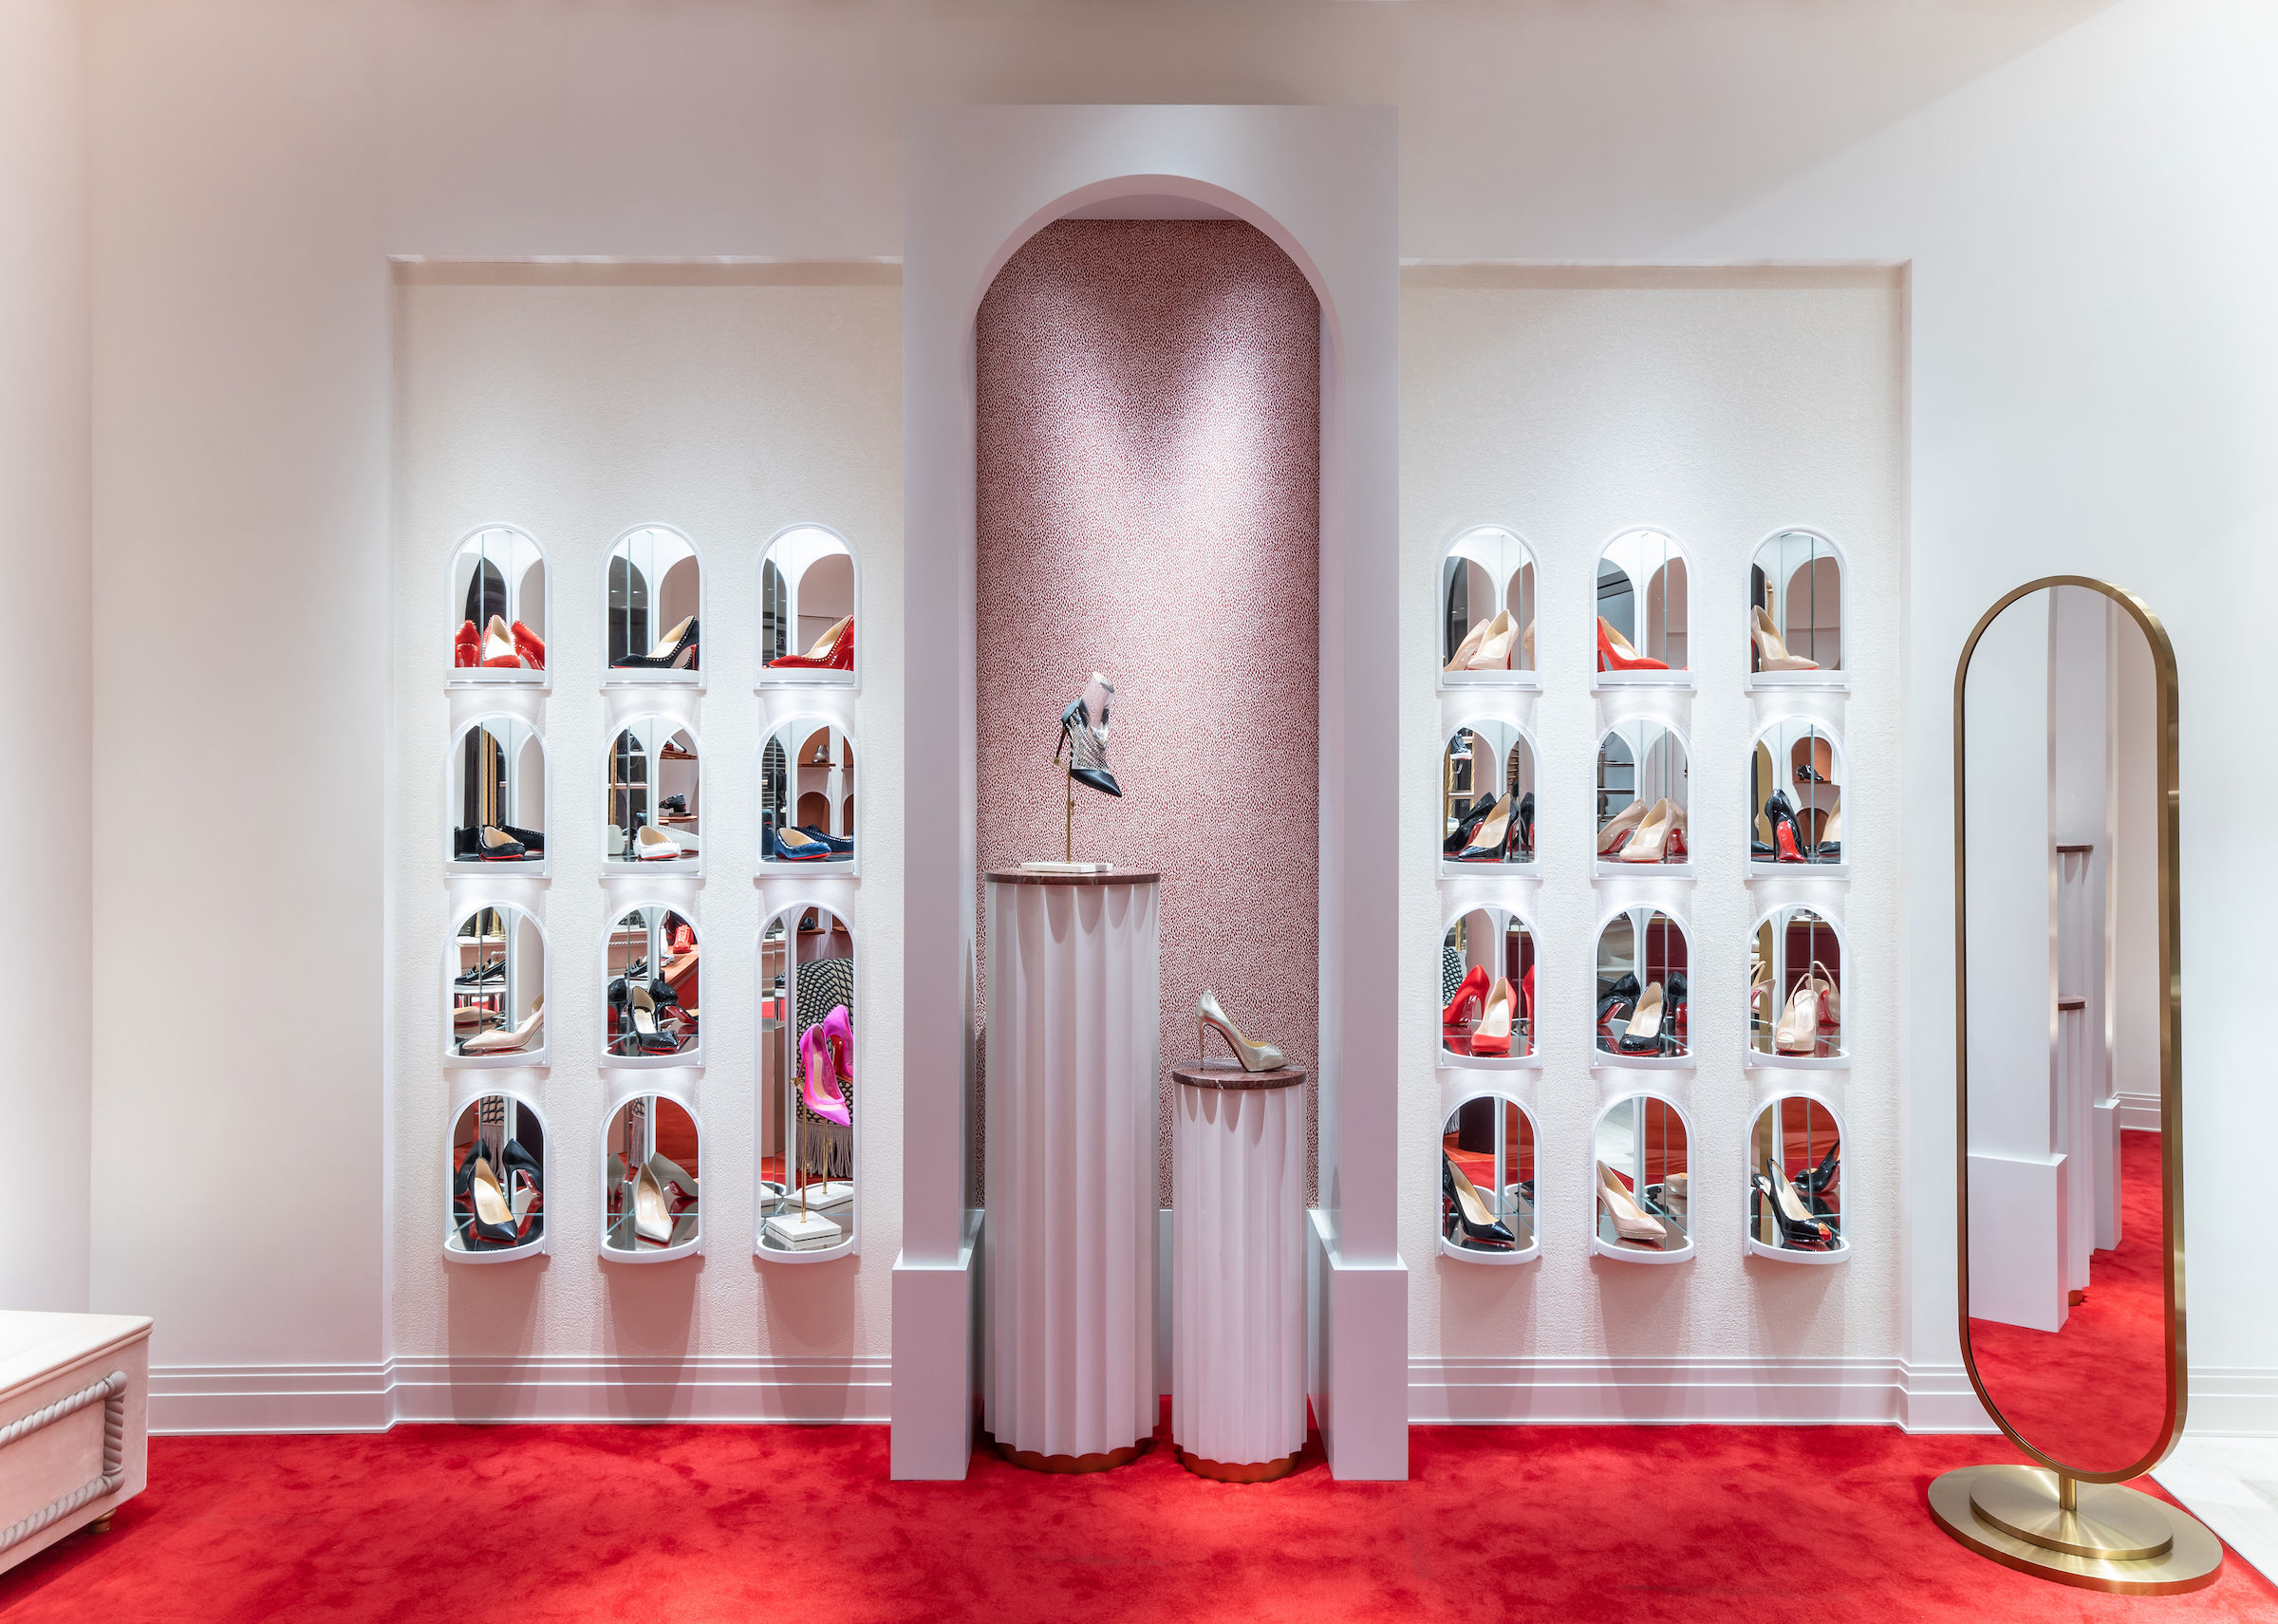 Boutique opening. Бутик Christian louboutin. Louboutin бутик. Фото бутик Кристиан лабутен. Boutique open close.